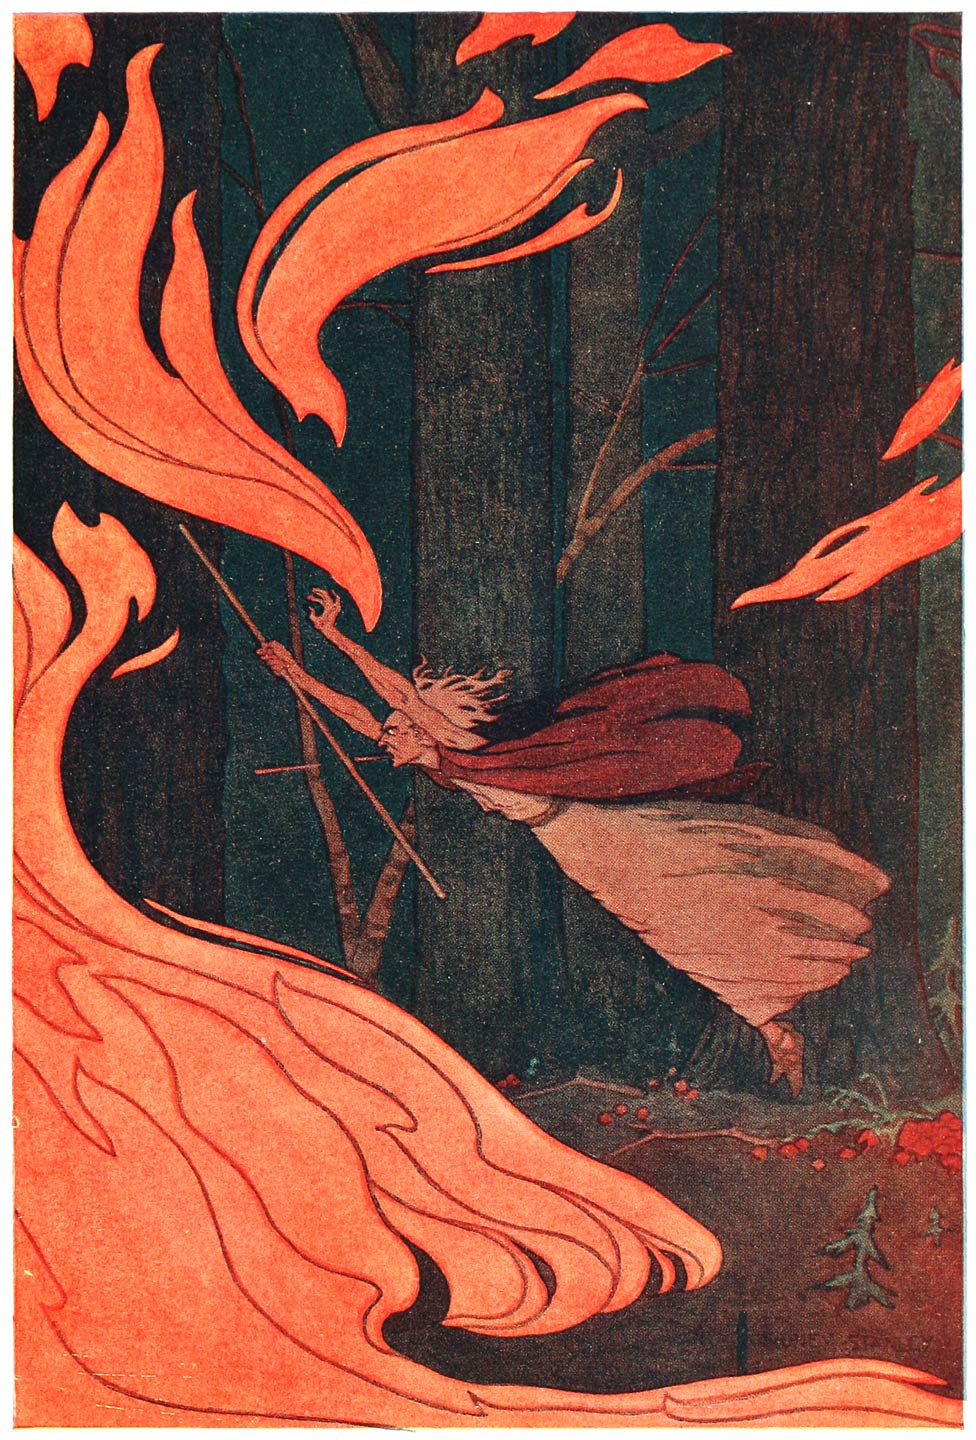 “The old witch spat on the fire”